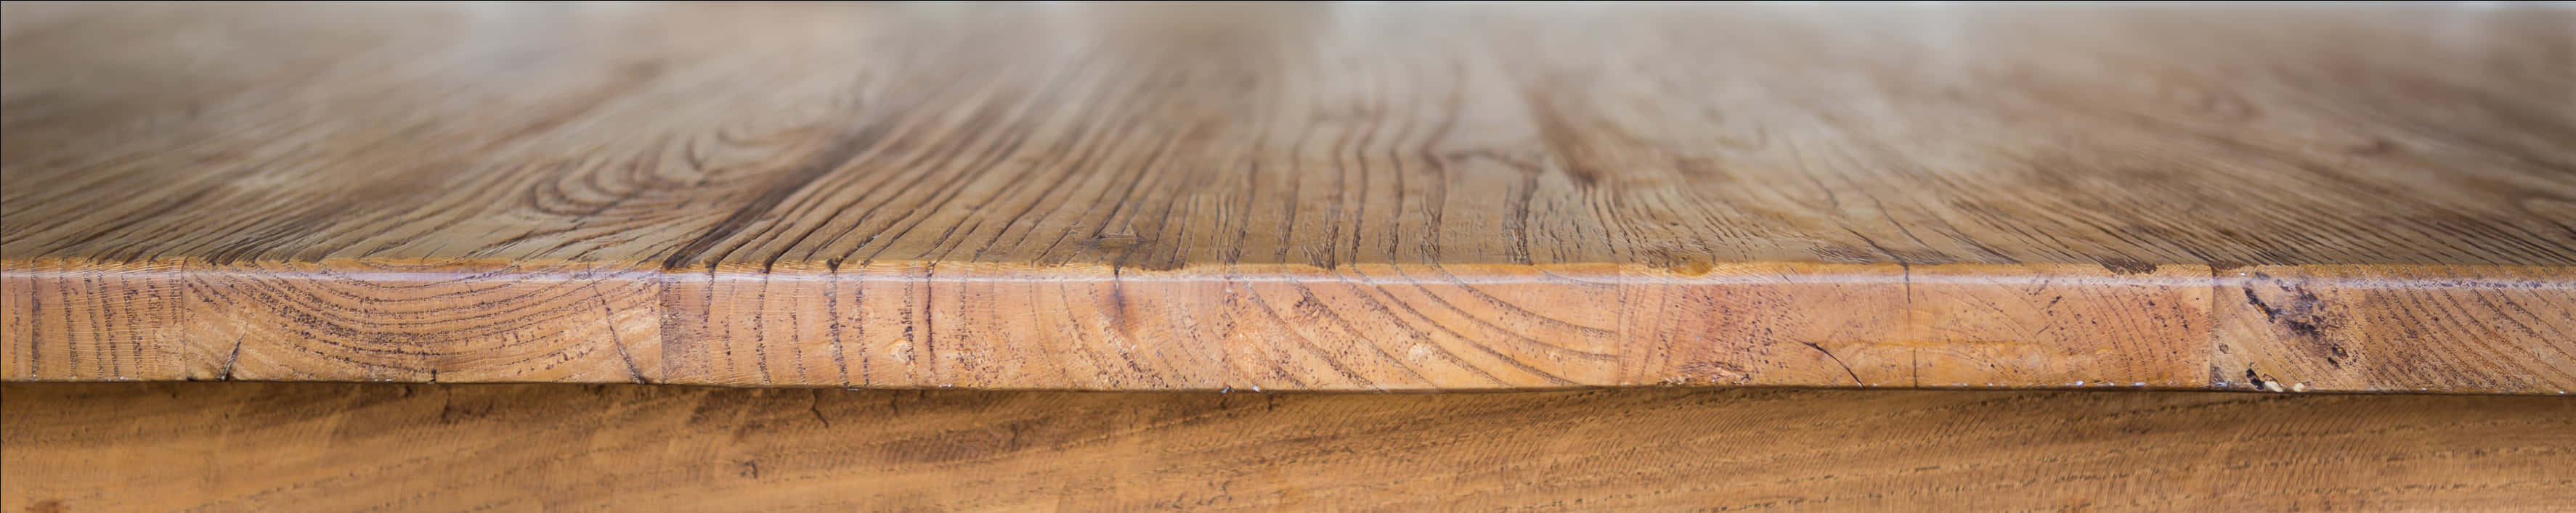 A Close Up Of A Wood Surface